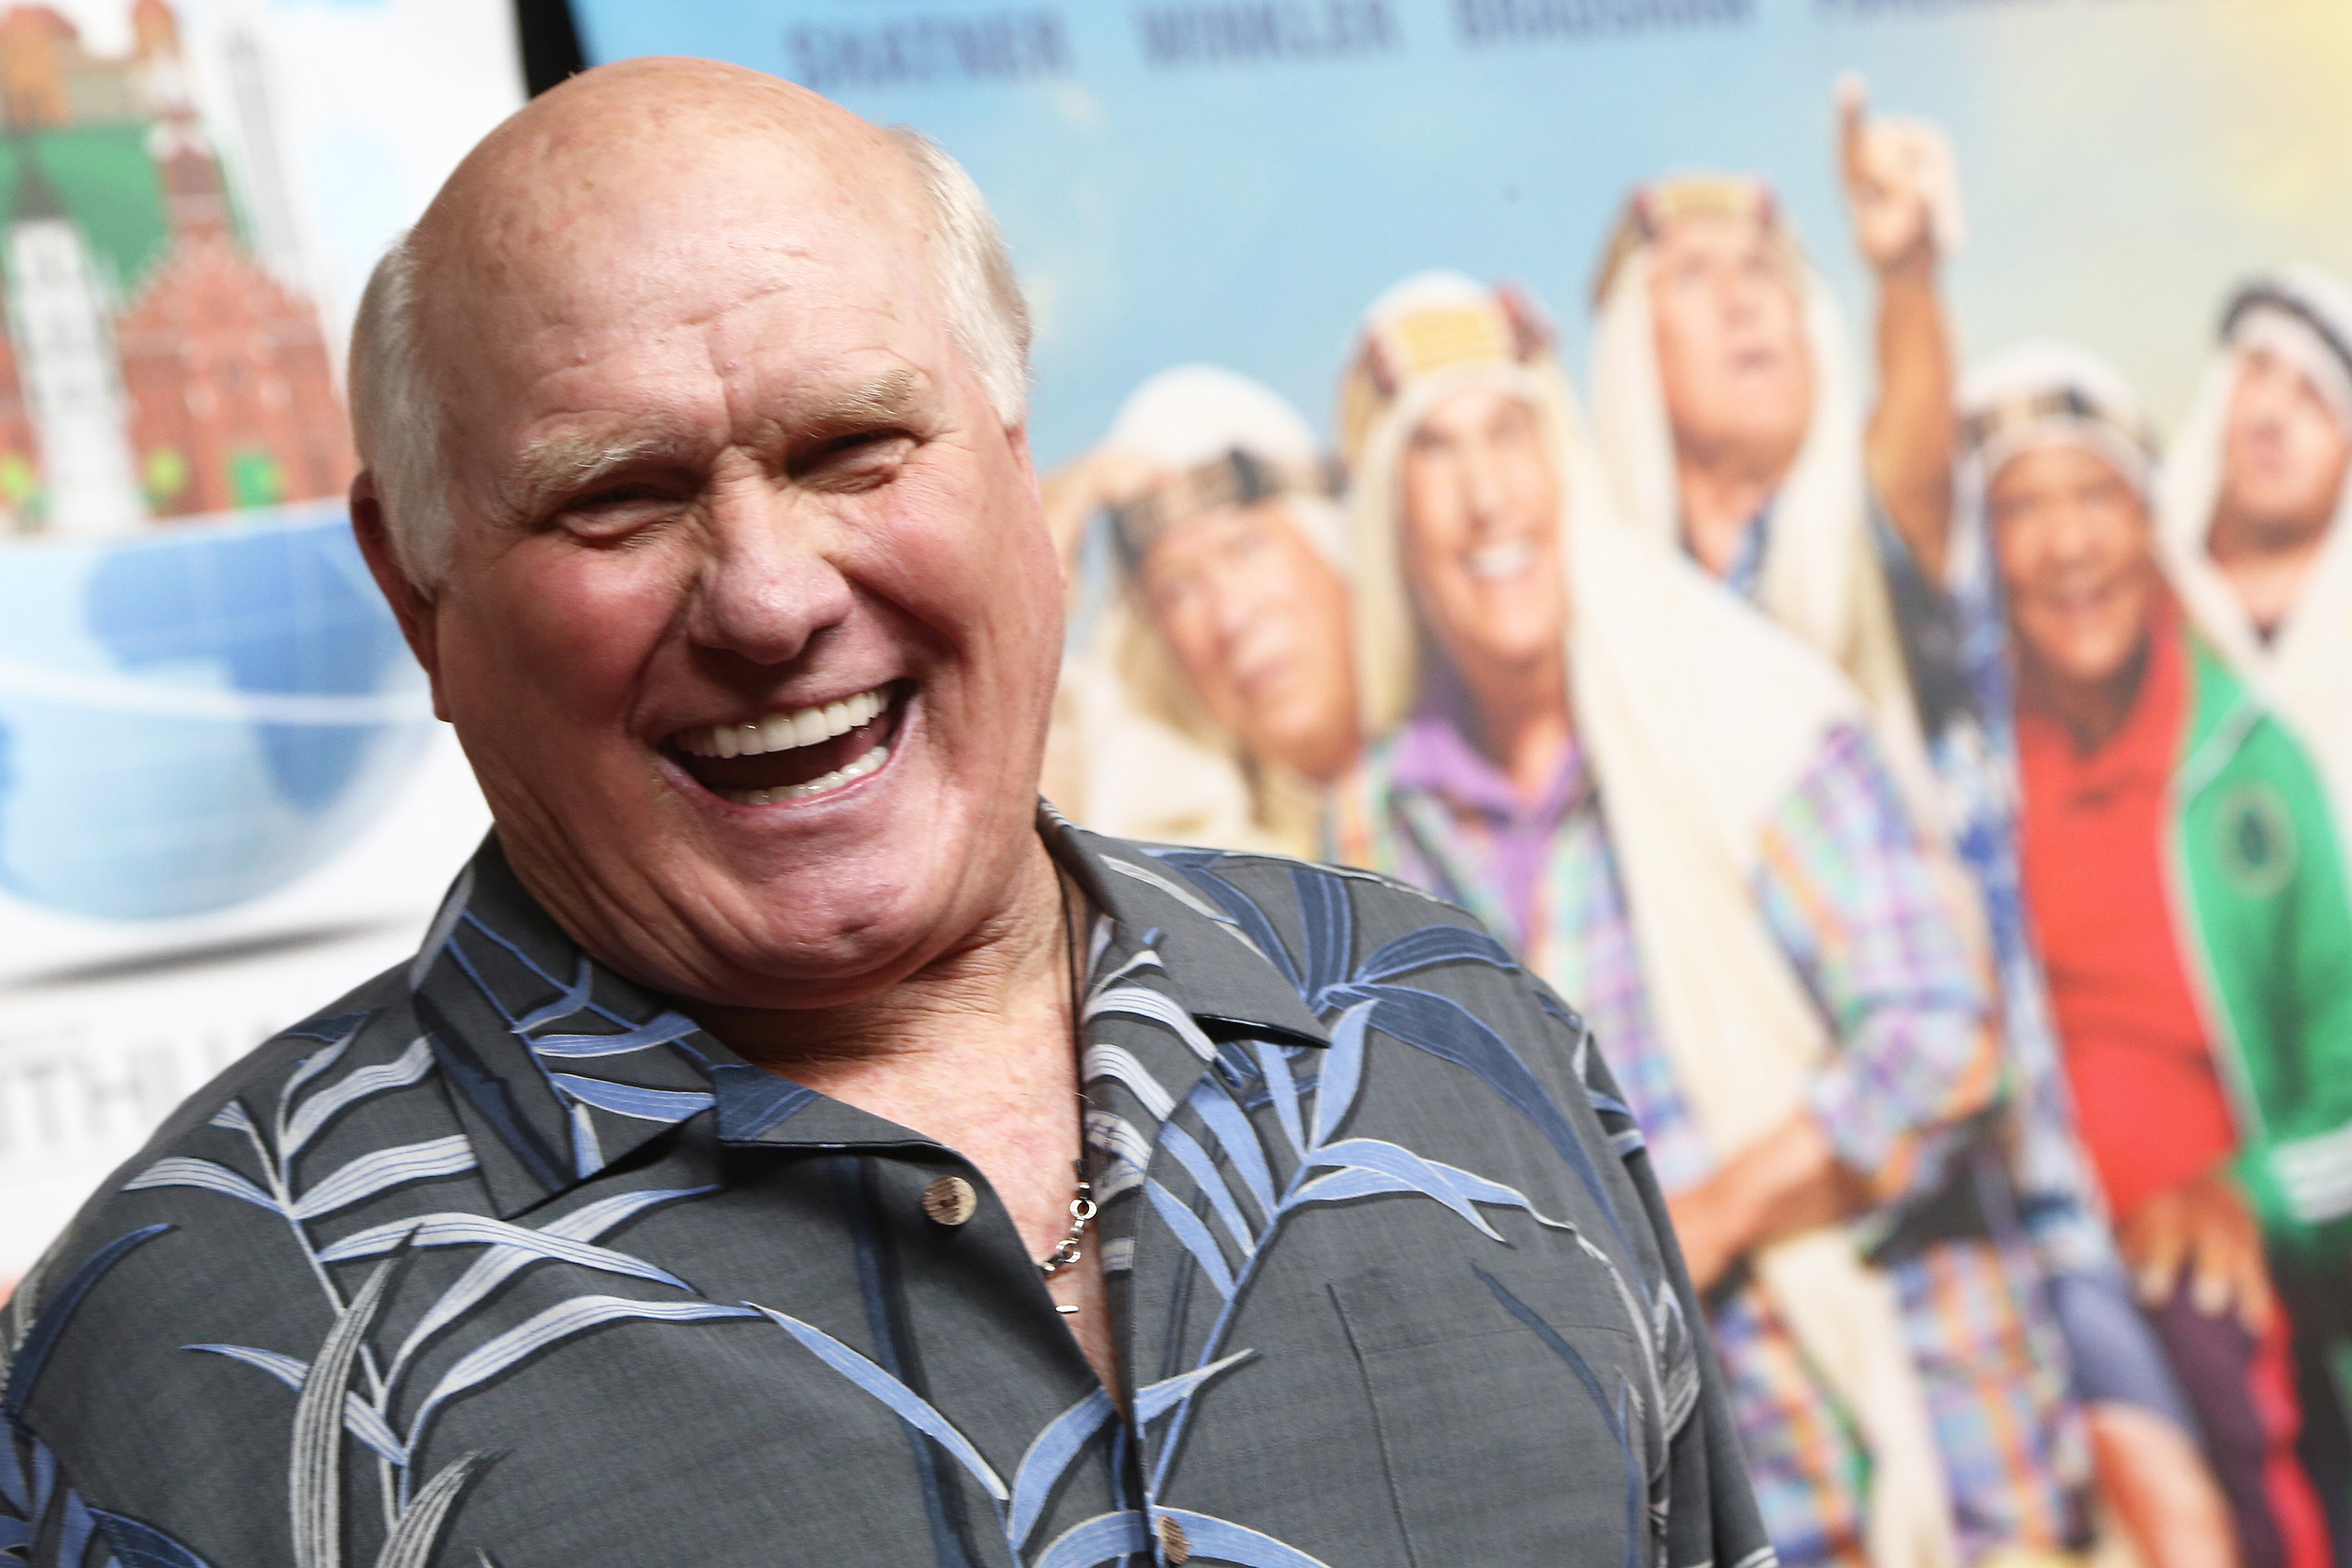 Terry Bradshaw attends the premiere of NBC's "Better Late Than Never" at Universal Studios Hollywood on November 29, 2017, in Universal City, California. | Source: Getty Images